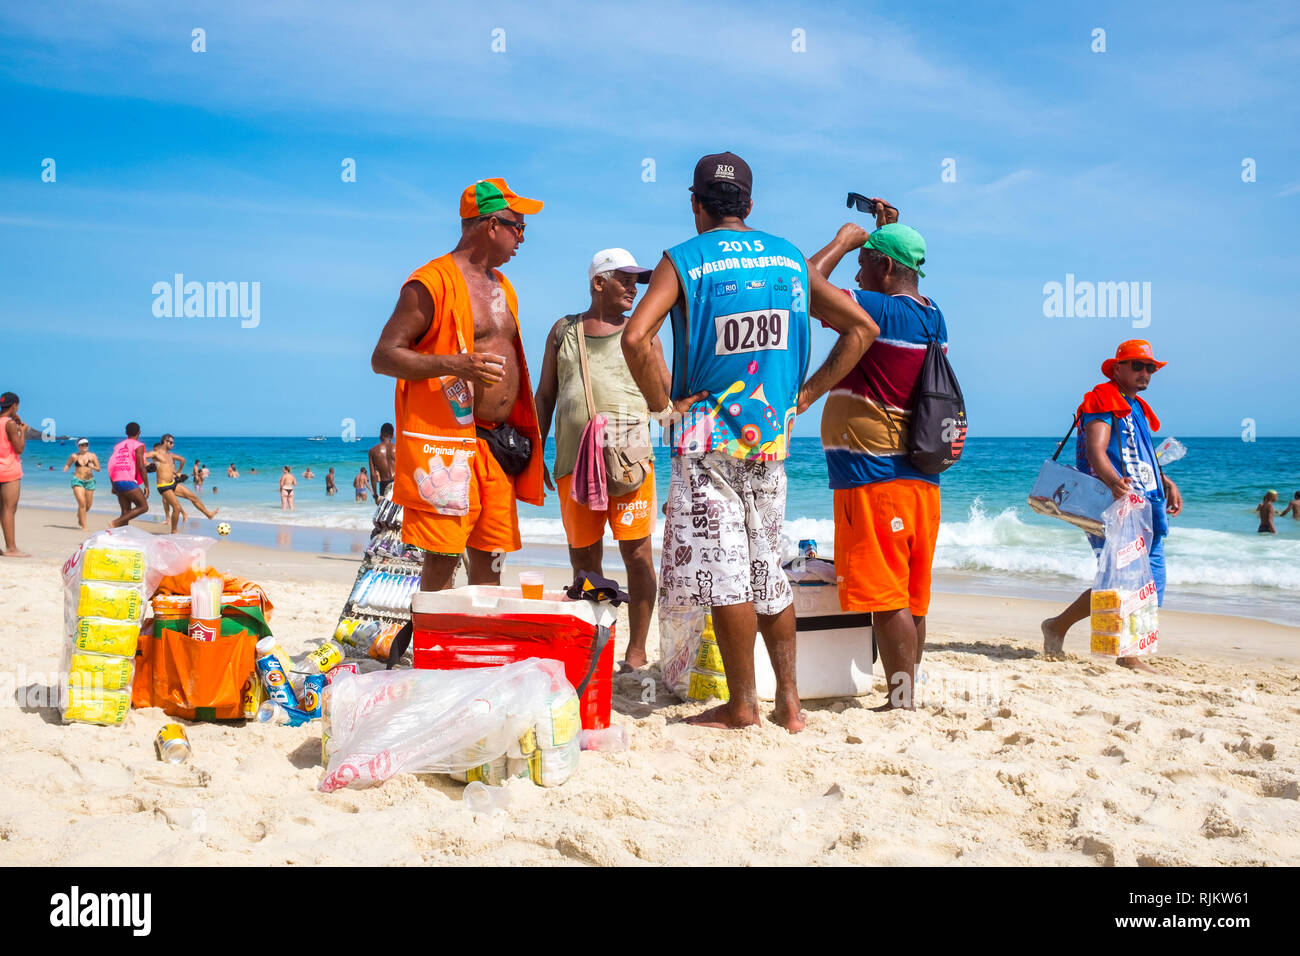 RIO DE JANEIRO - FEBRUARY, 2016: A group of Brazilian beach vendors stand together on the shore of Ipanema Beach, taking a break from walking in heat. Stock Photo